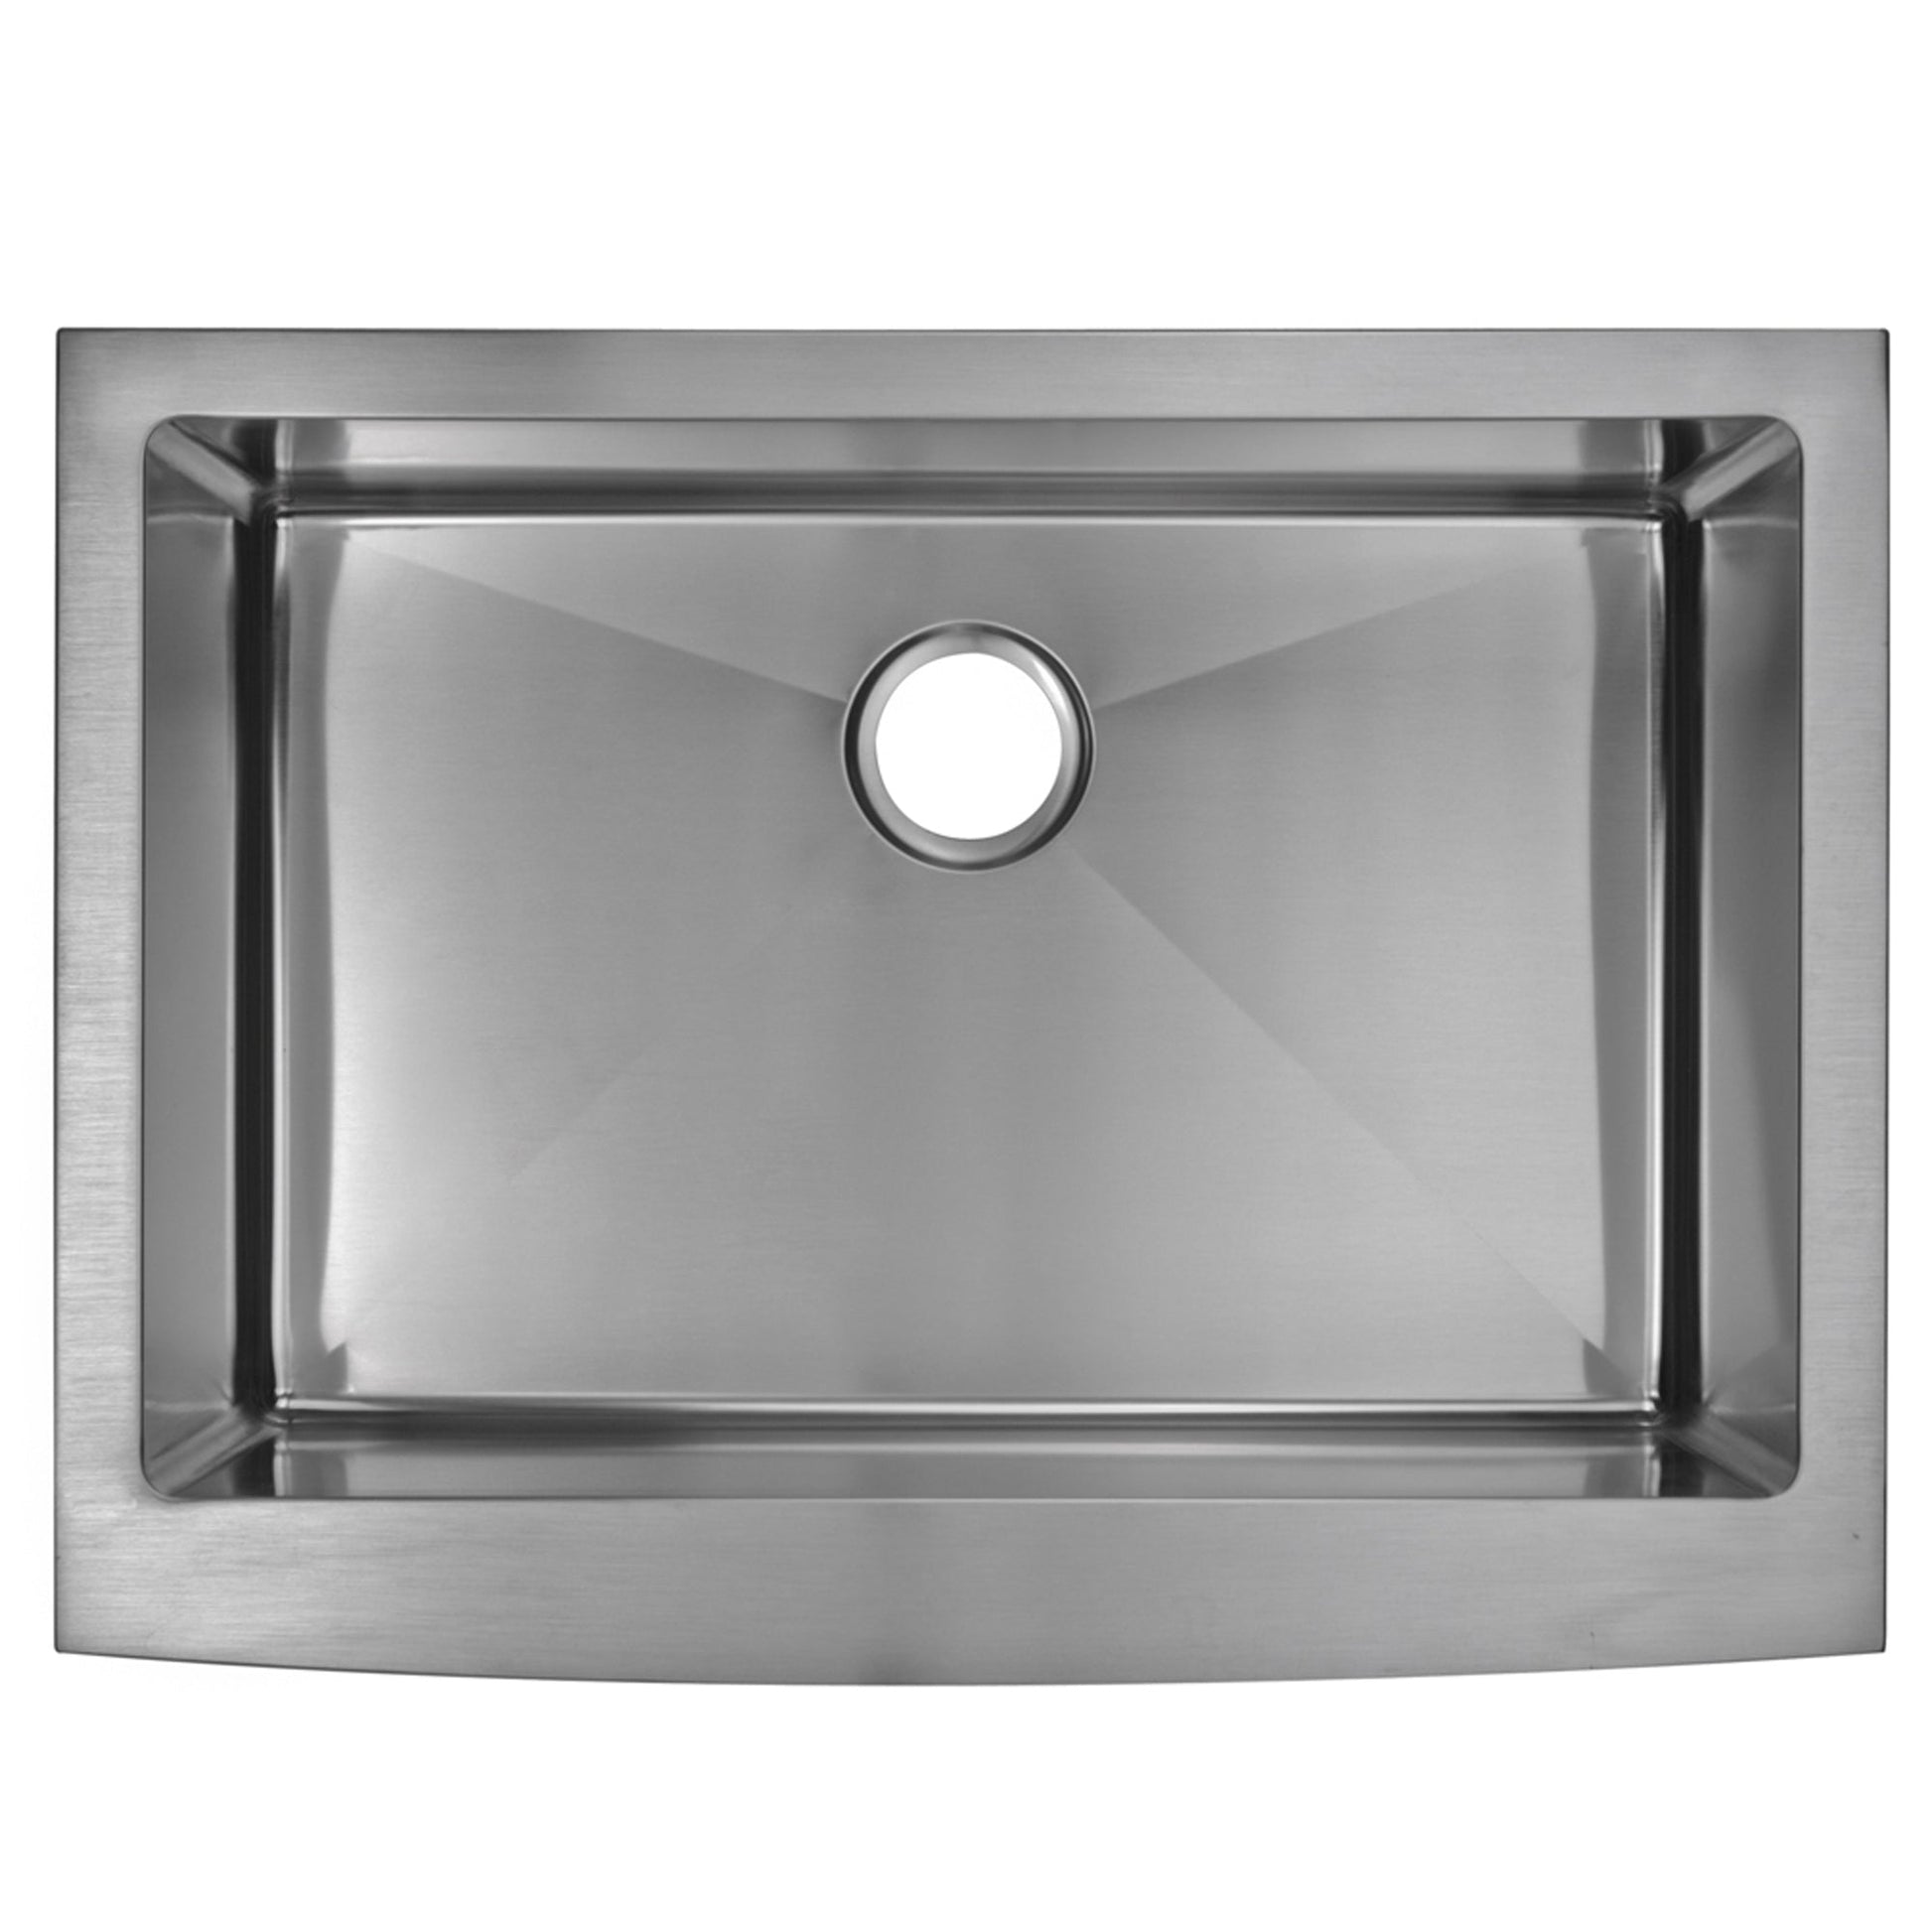 Water Creation Corner Radius Single Bowl Stainless Steel Hand Made Apron Front 30 Inch X 22 Inch Sink With Drain, Strainer, And Bottom Grid